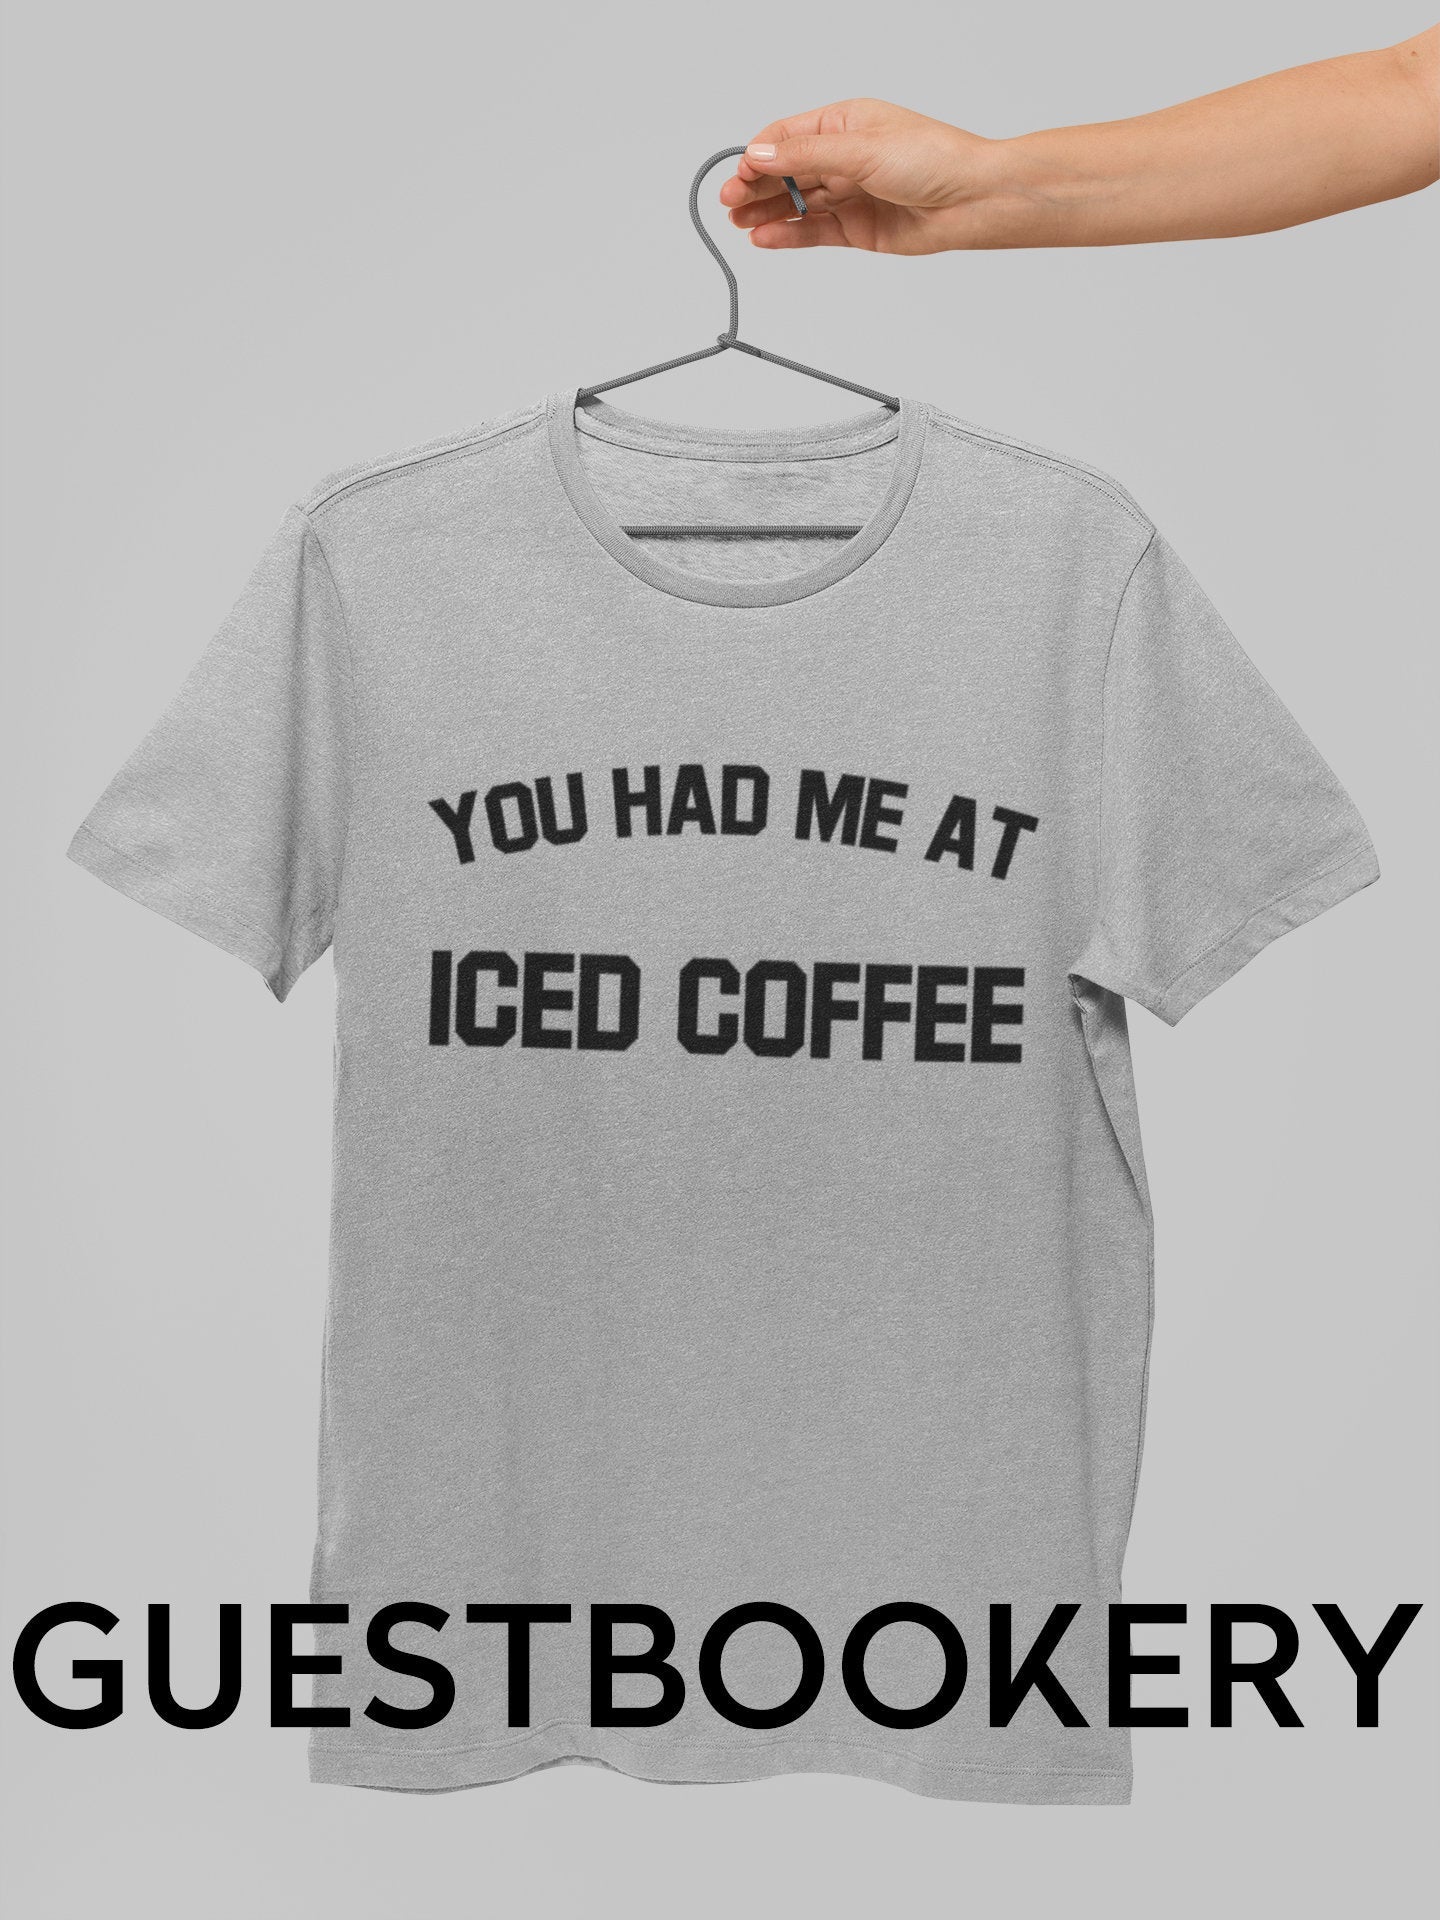 You Had Me at Iced Coffee T-Shirt - Guestbookery